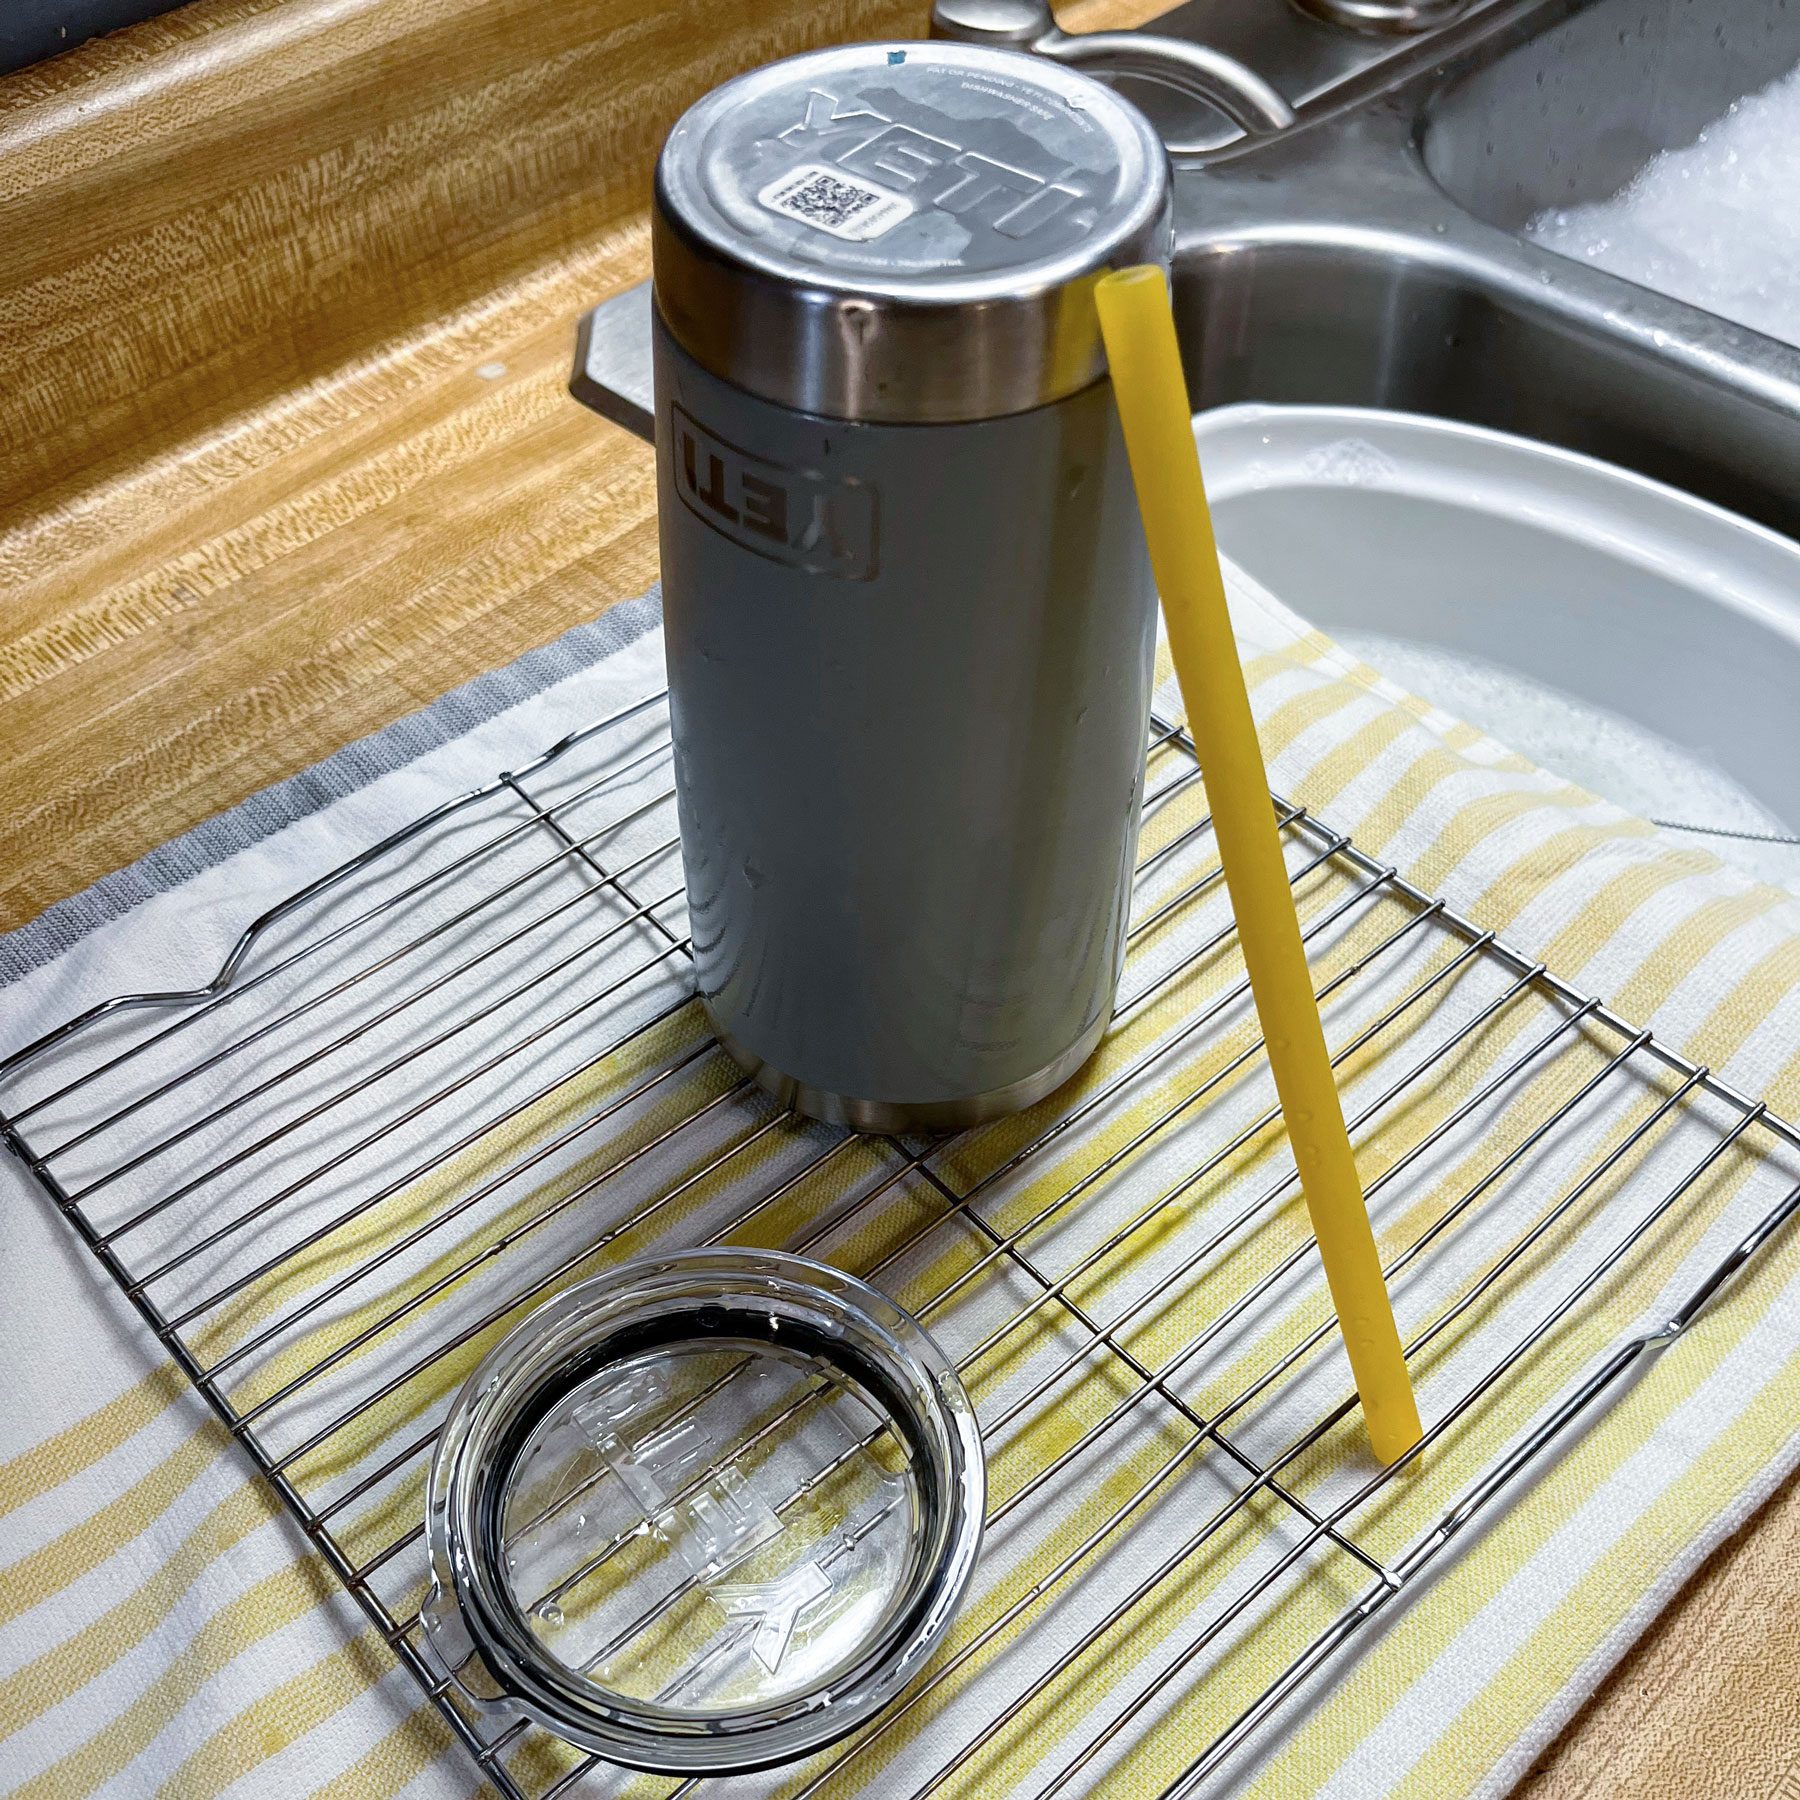 Water bottle straw and a bottle lid place on a surface for drying